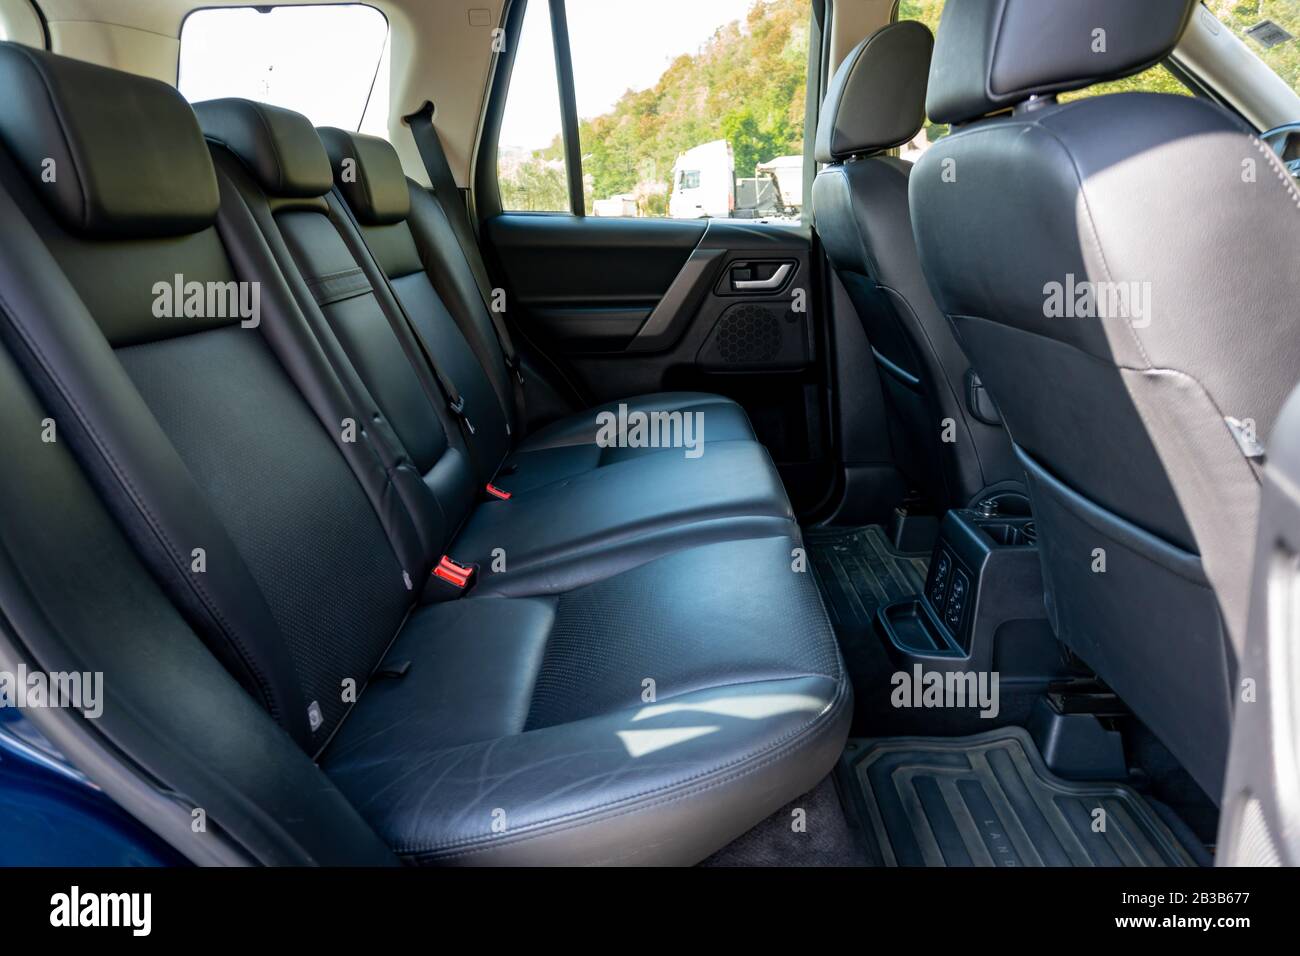 Panoramic roof - double sunroof in a luxurious suv car, glazed dach glass, blue tinted windows, and leather upholstery. Inside a luxurious SUV Stock Photo